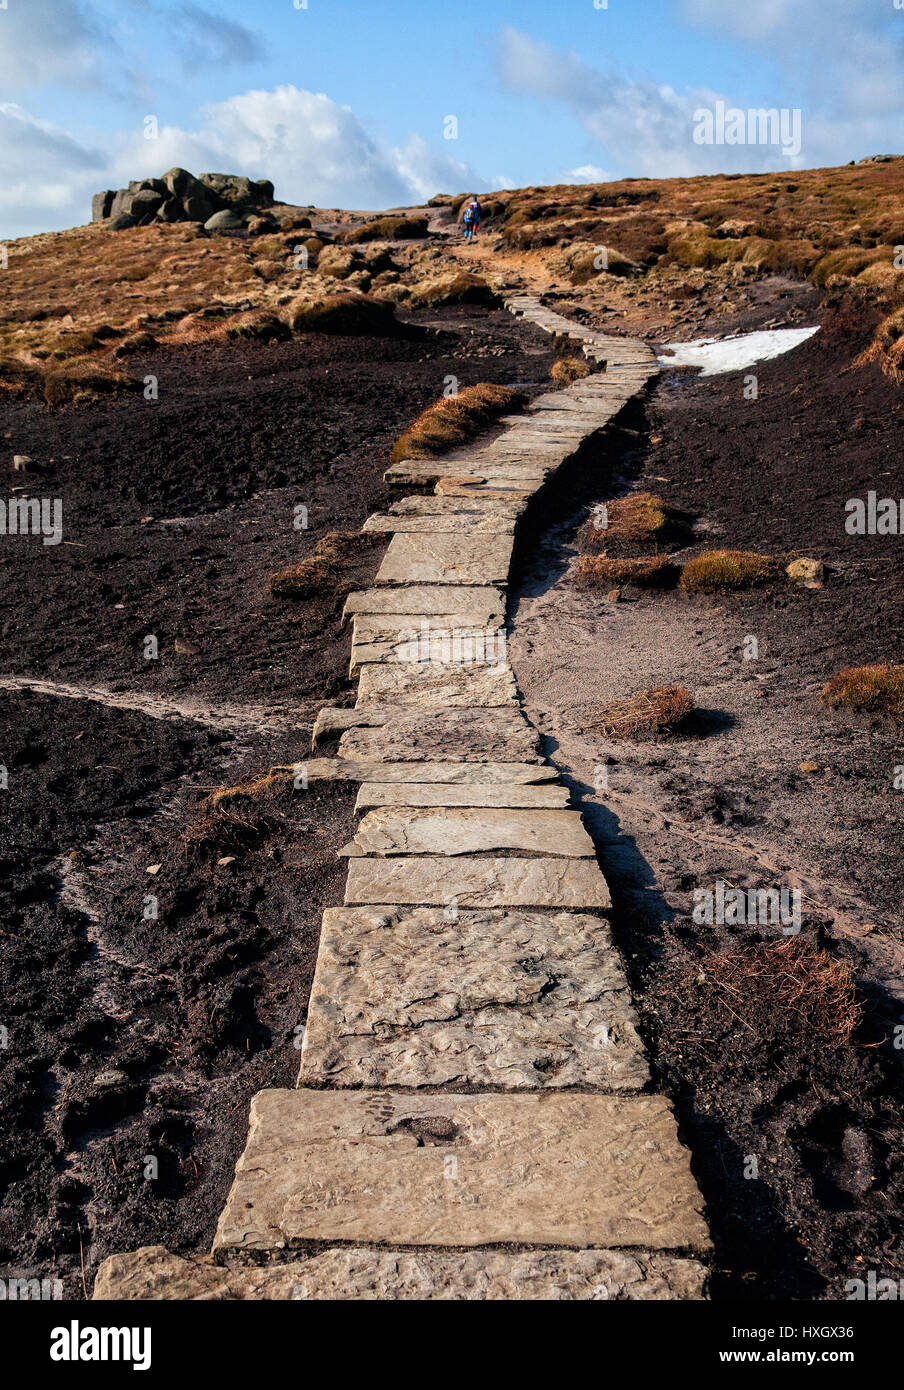 Flagstone path laid across exposed peat to reduce erosion from walkers on the plateau of kinder Scout in the Derbyshire Peak District UK Stock Photo